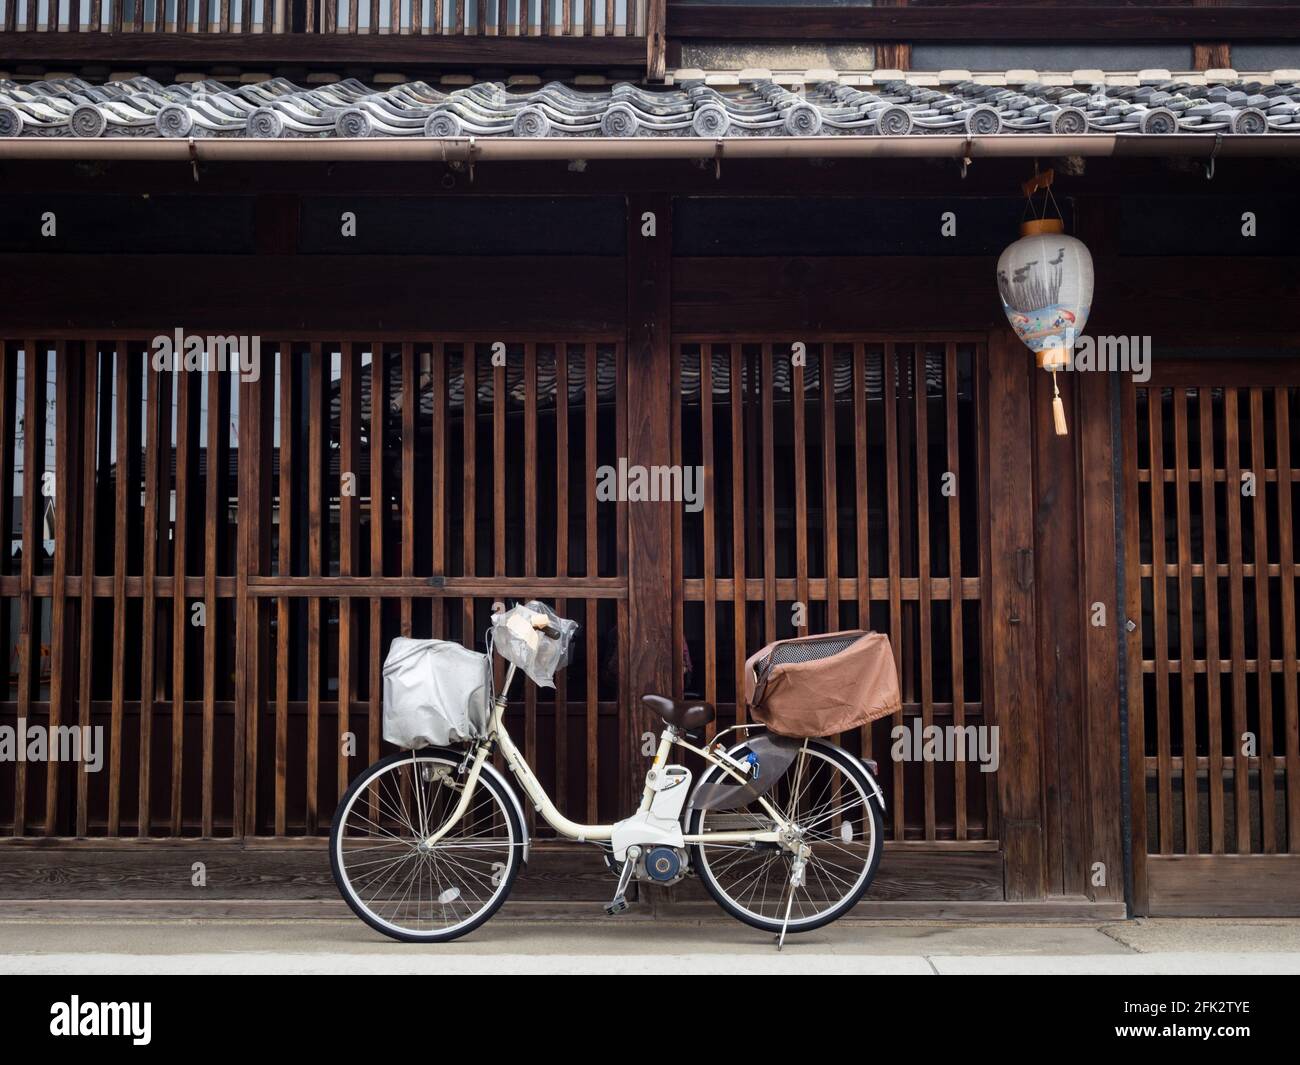 Gifu, Japan - October 5, 2015: Bicycle parked in front of traditional Japanese house on historic Kawaramachi street Stock Photo